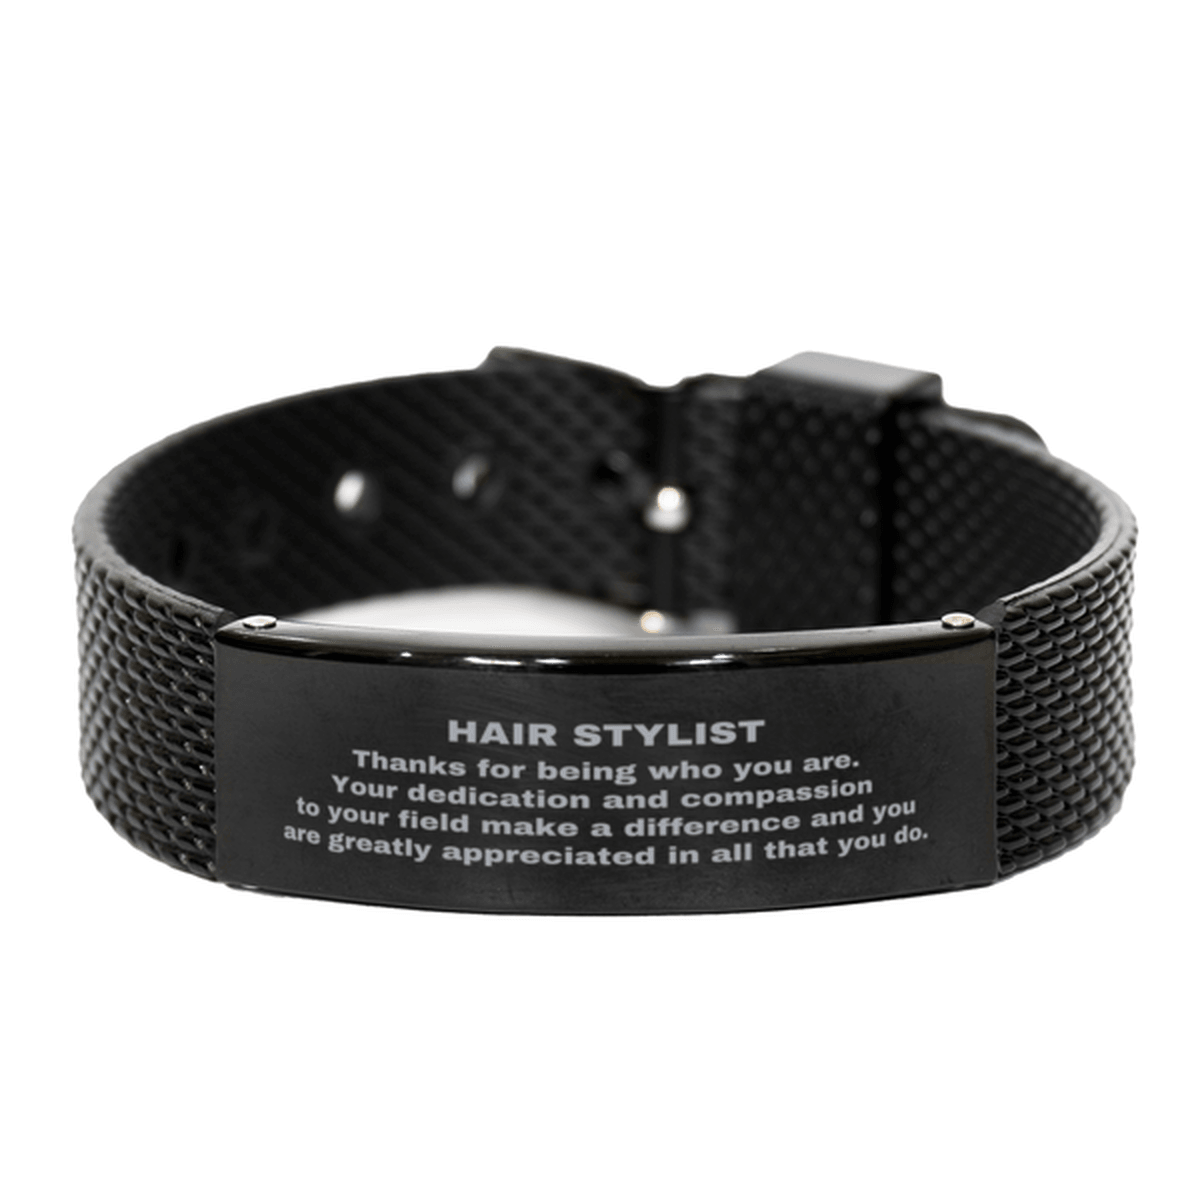 Hair Stylist Black Shark Mesh Stainless Steel Engraved Bracelet - Thanks for being who you are - Birthday Christmas Jewelry Gifts Coworkers Colleague Boss - Mallard Moon Gift Shop